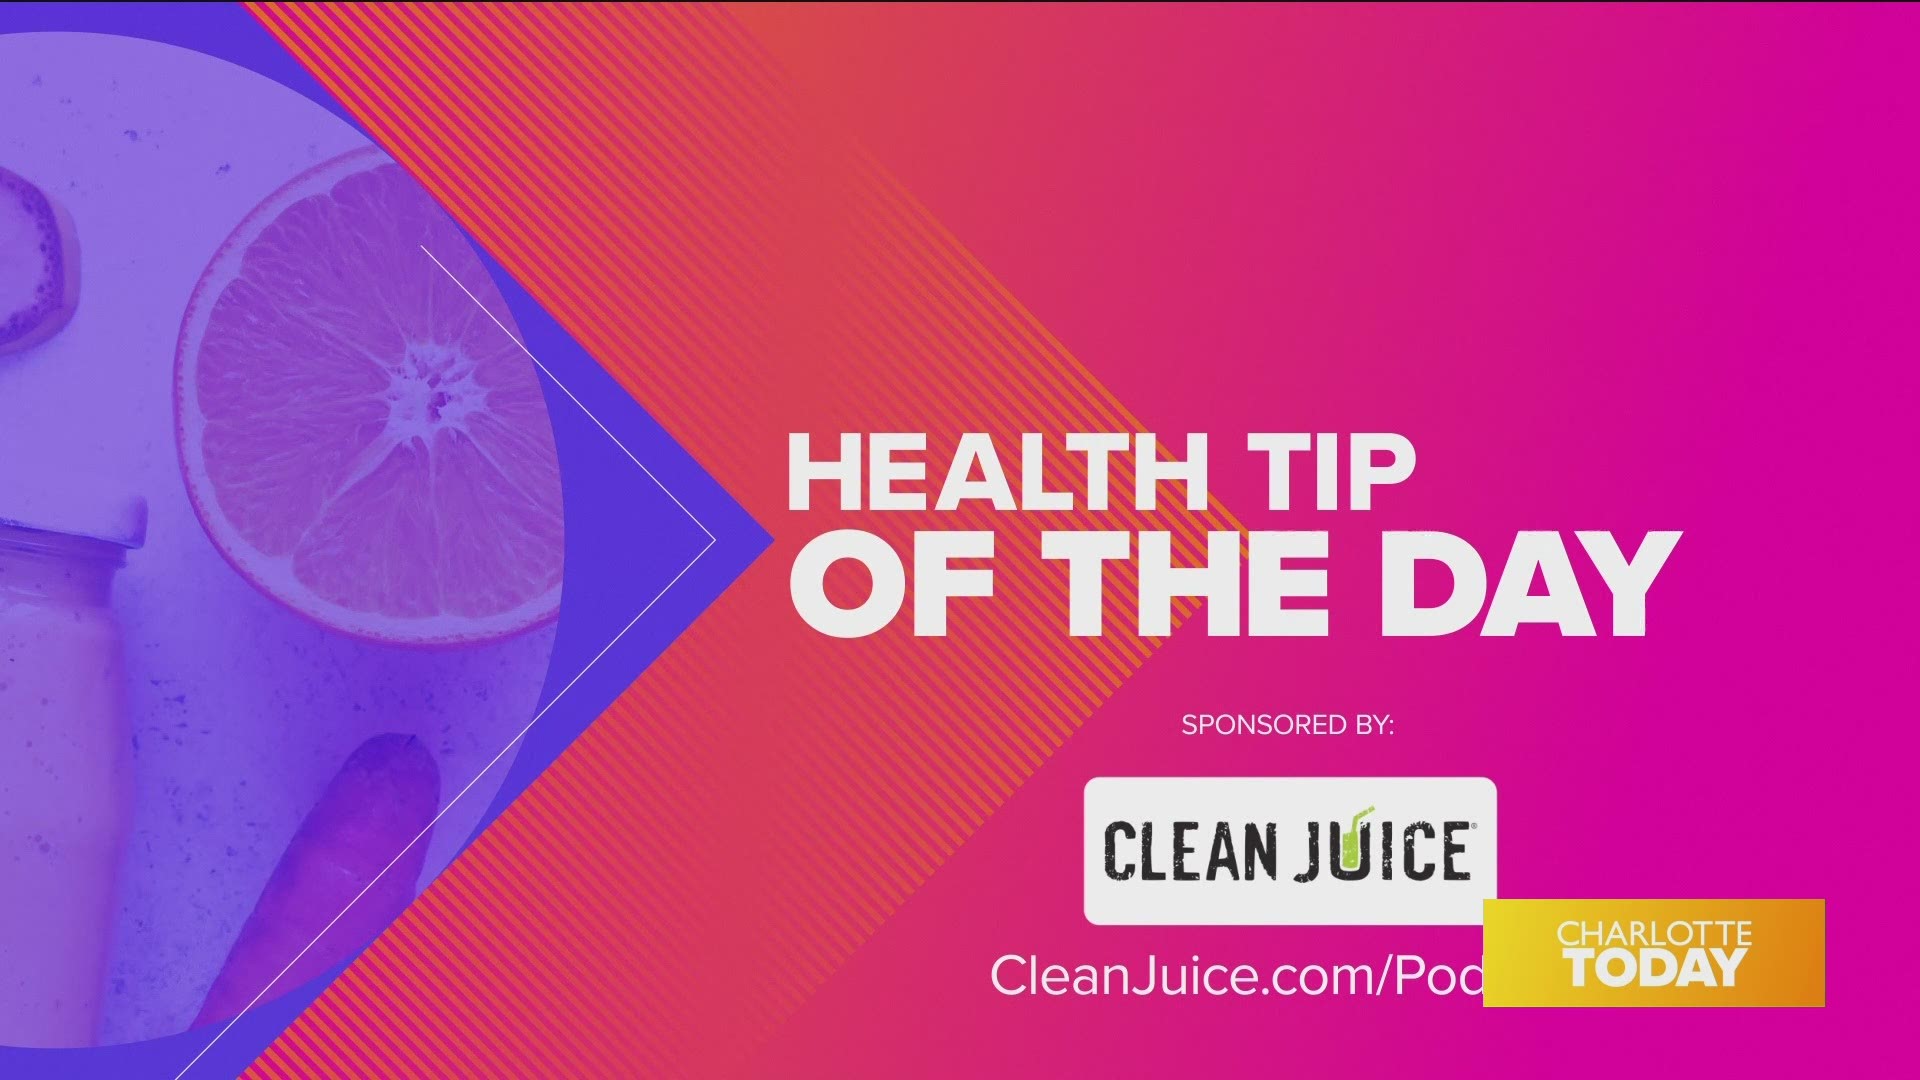 Clean Juice presents today’s health tip to manage anxiety naturally.